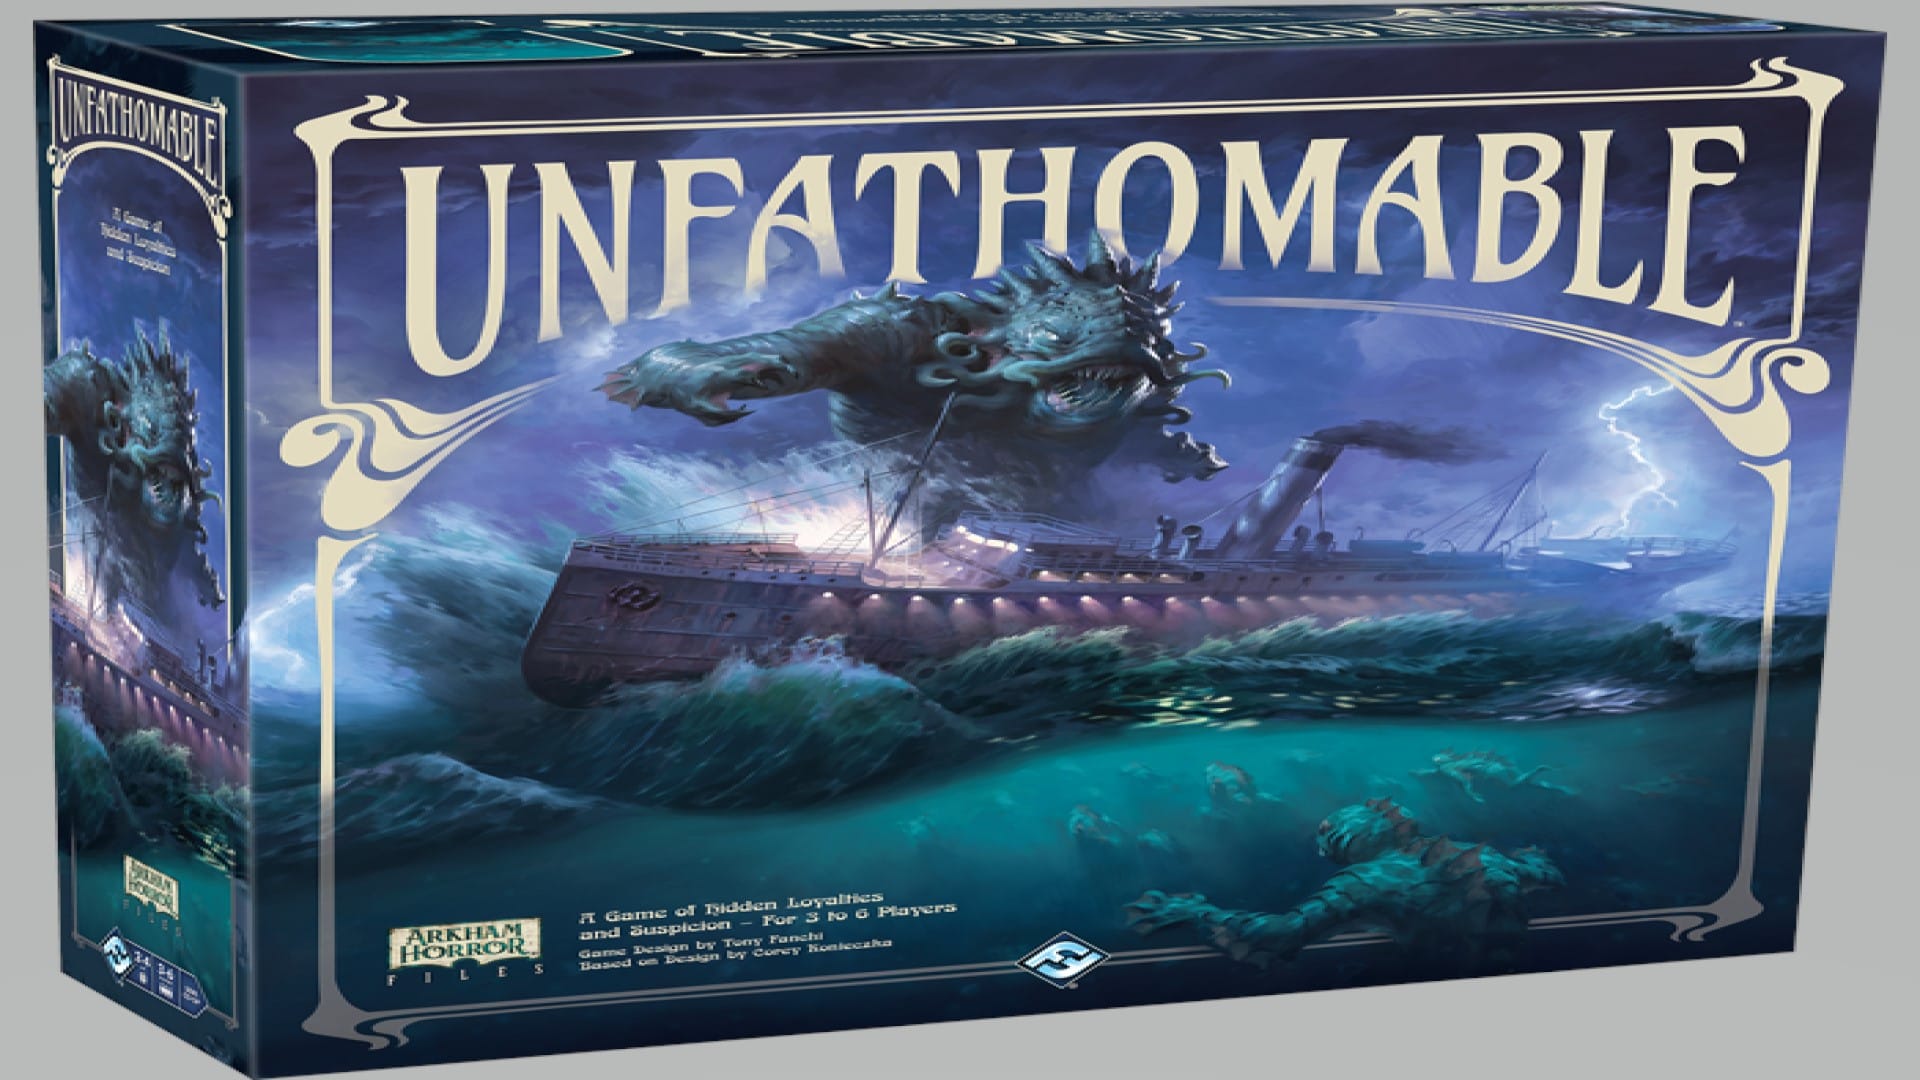 The box art for the game Unfathomable